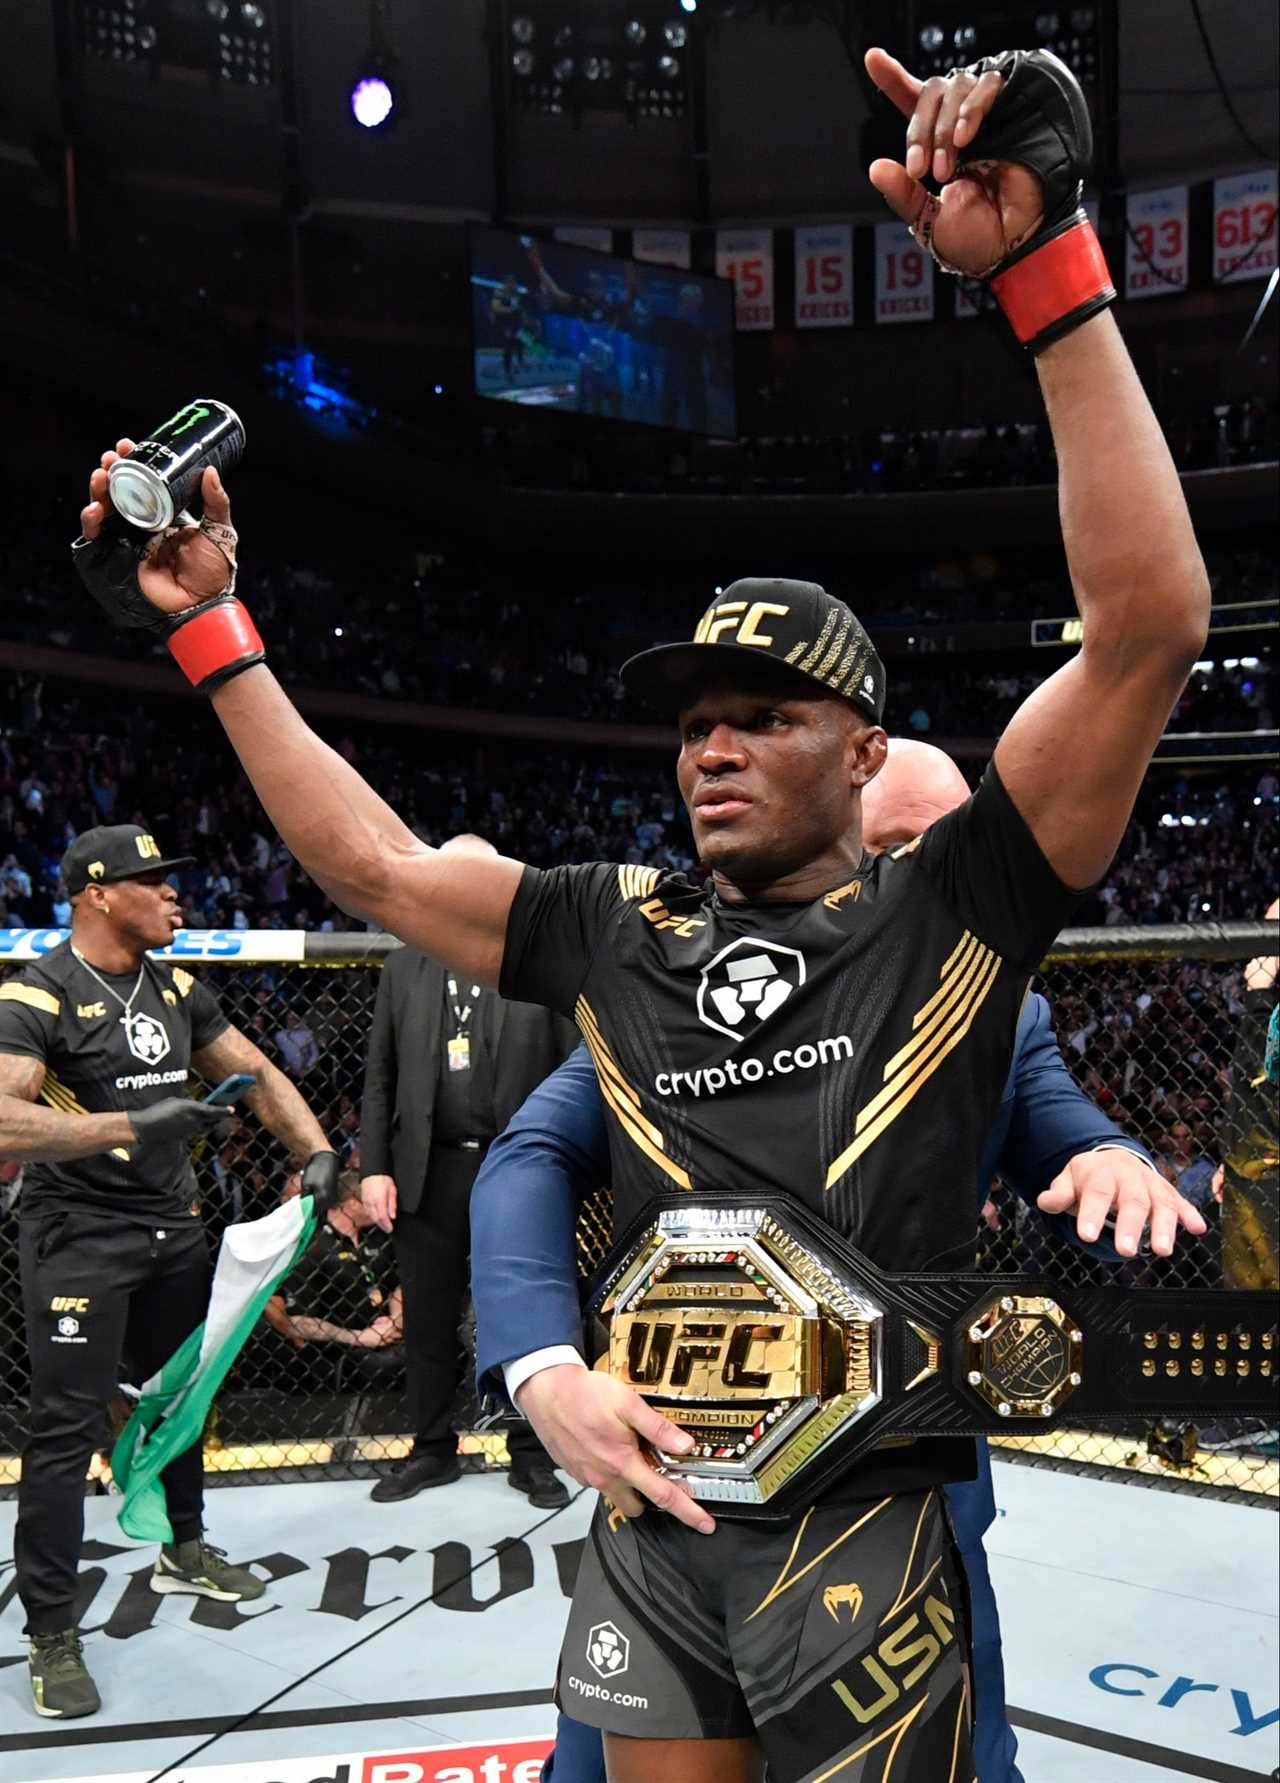 Kamaru Usman claims UFC 273 star KhamzatChimaev hasn't done any and needs to fight a few more fights before title shot.